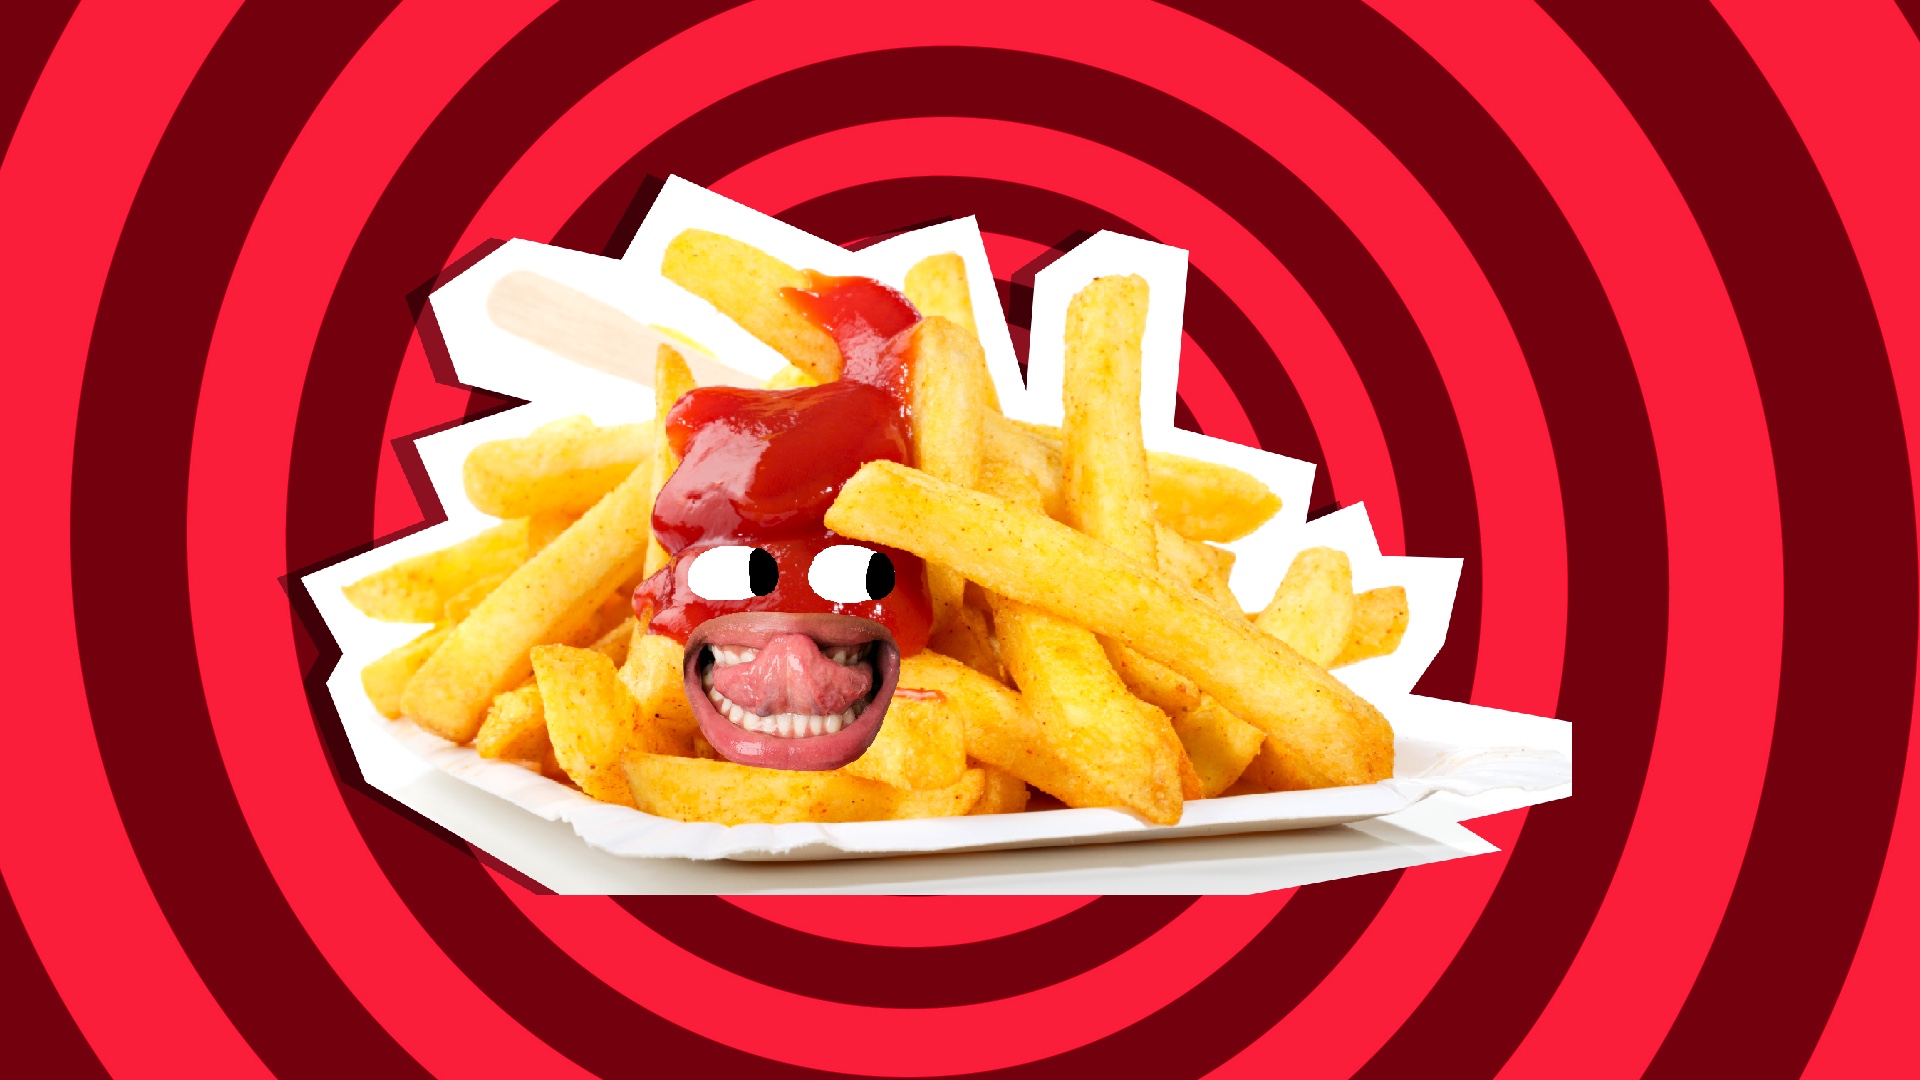 A plate of chips and a blob of ketchup